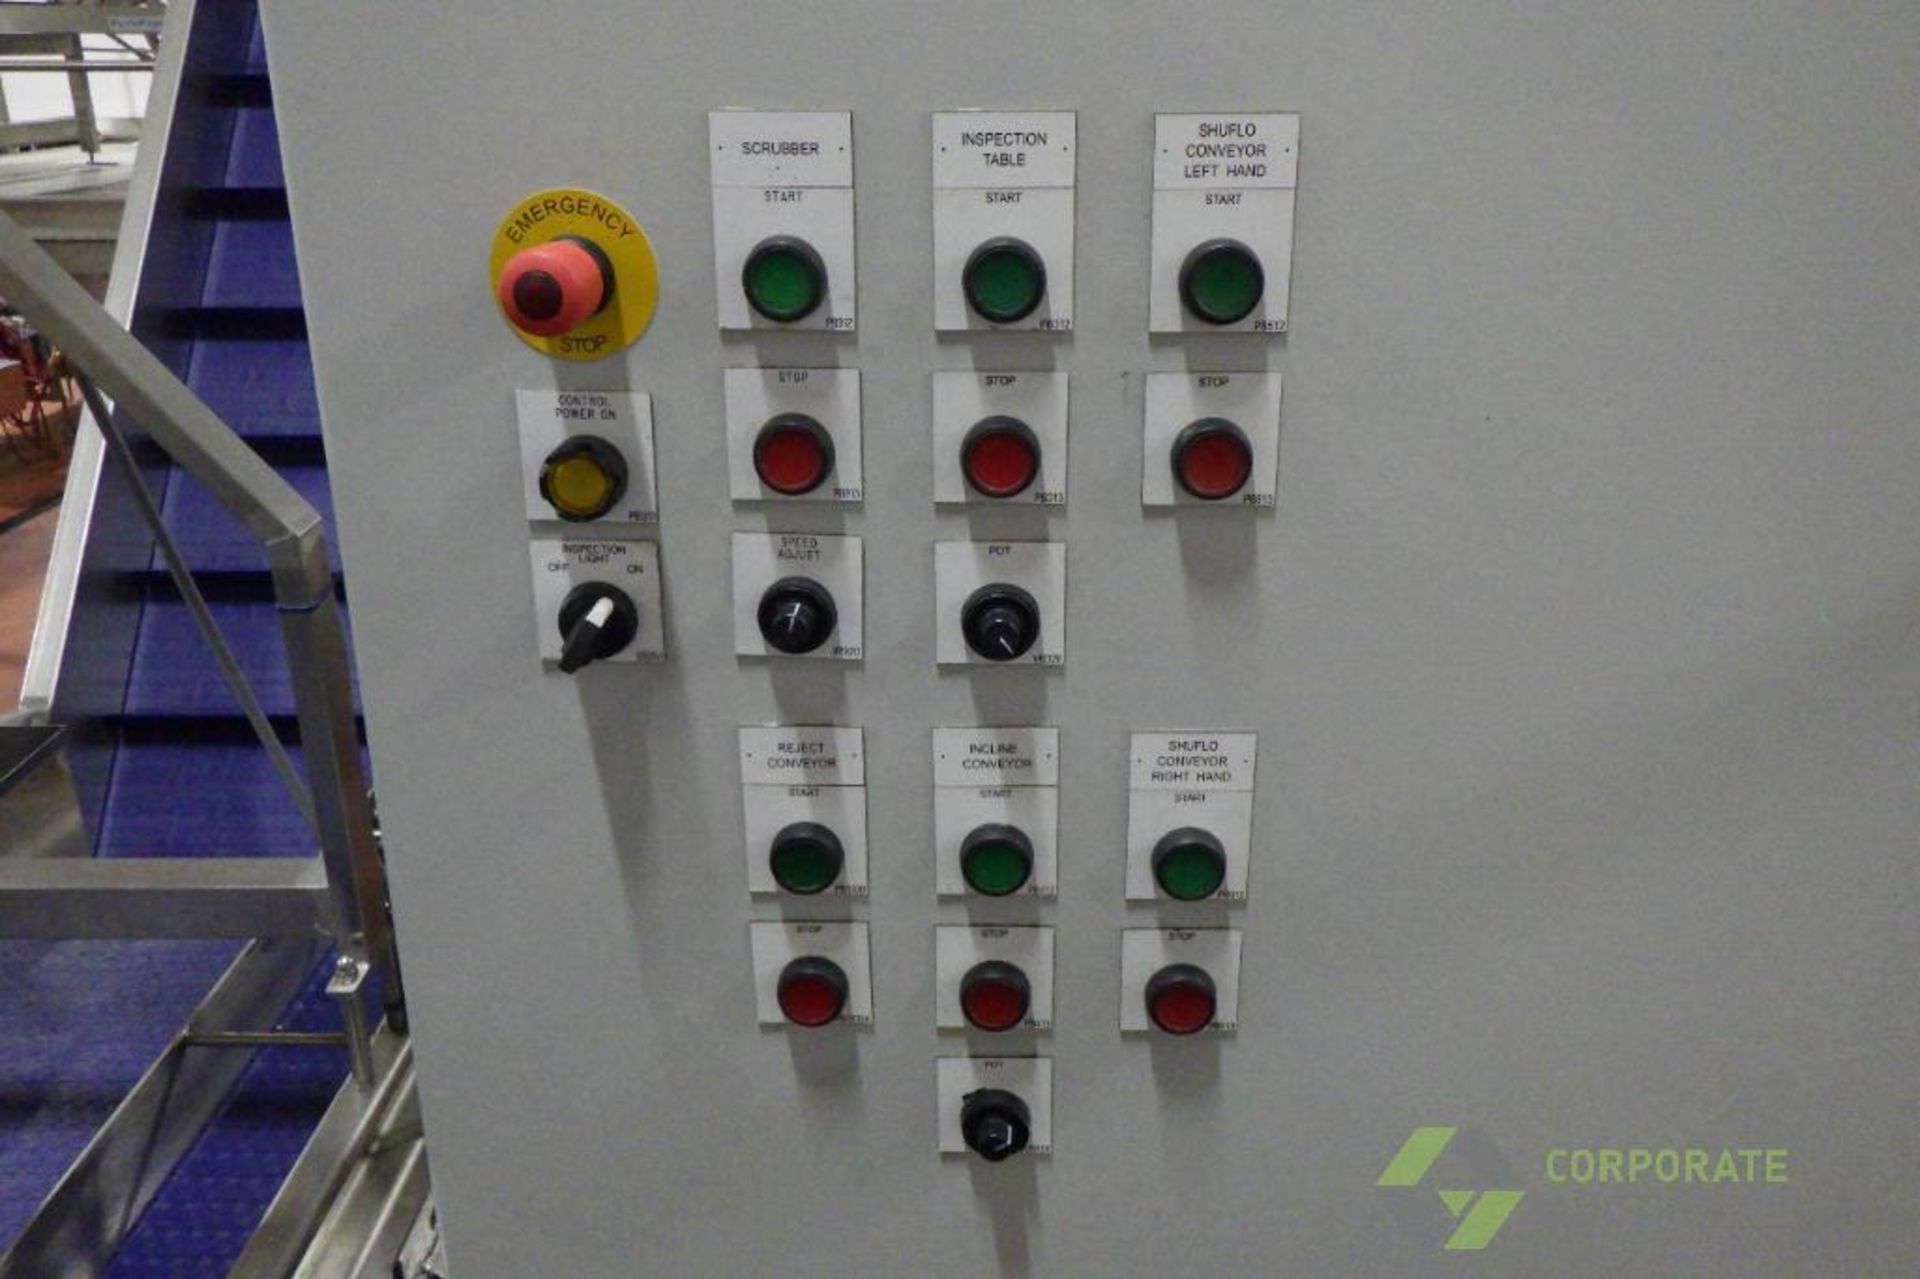 Inspection system control panel - Image 2 of 9